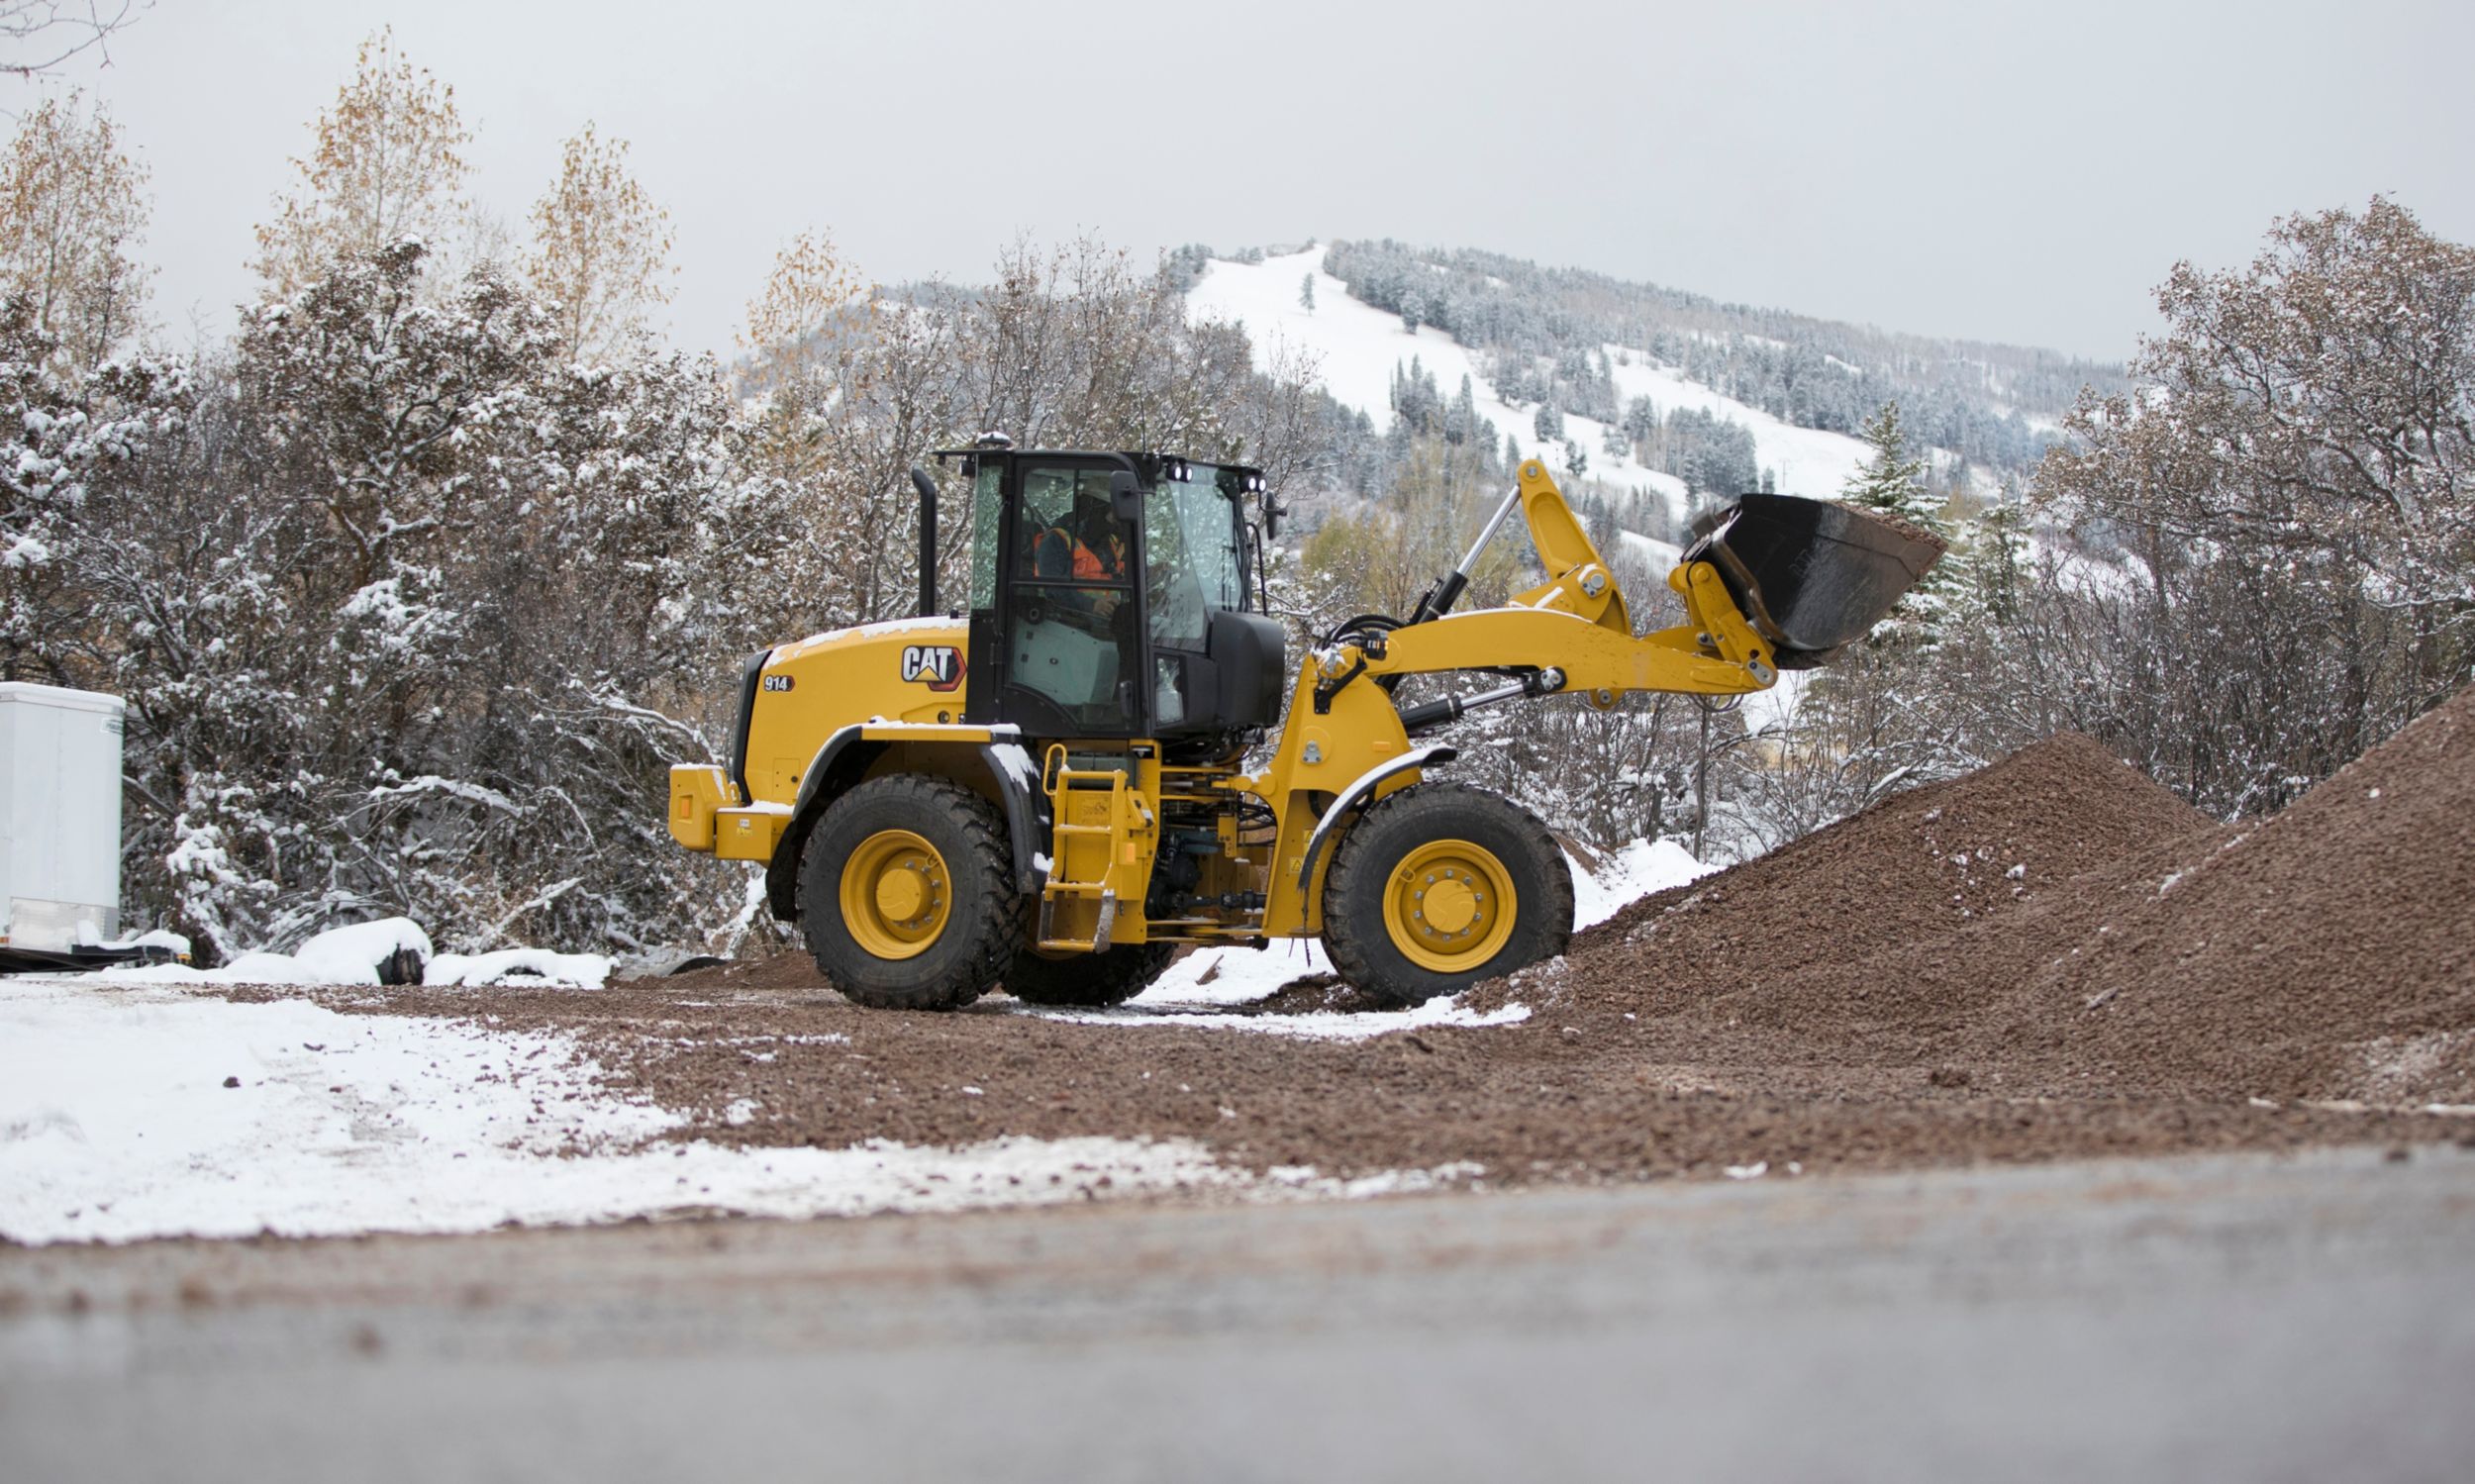 The 914 Compact Wheel Loader.